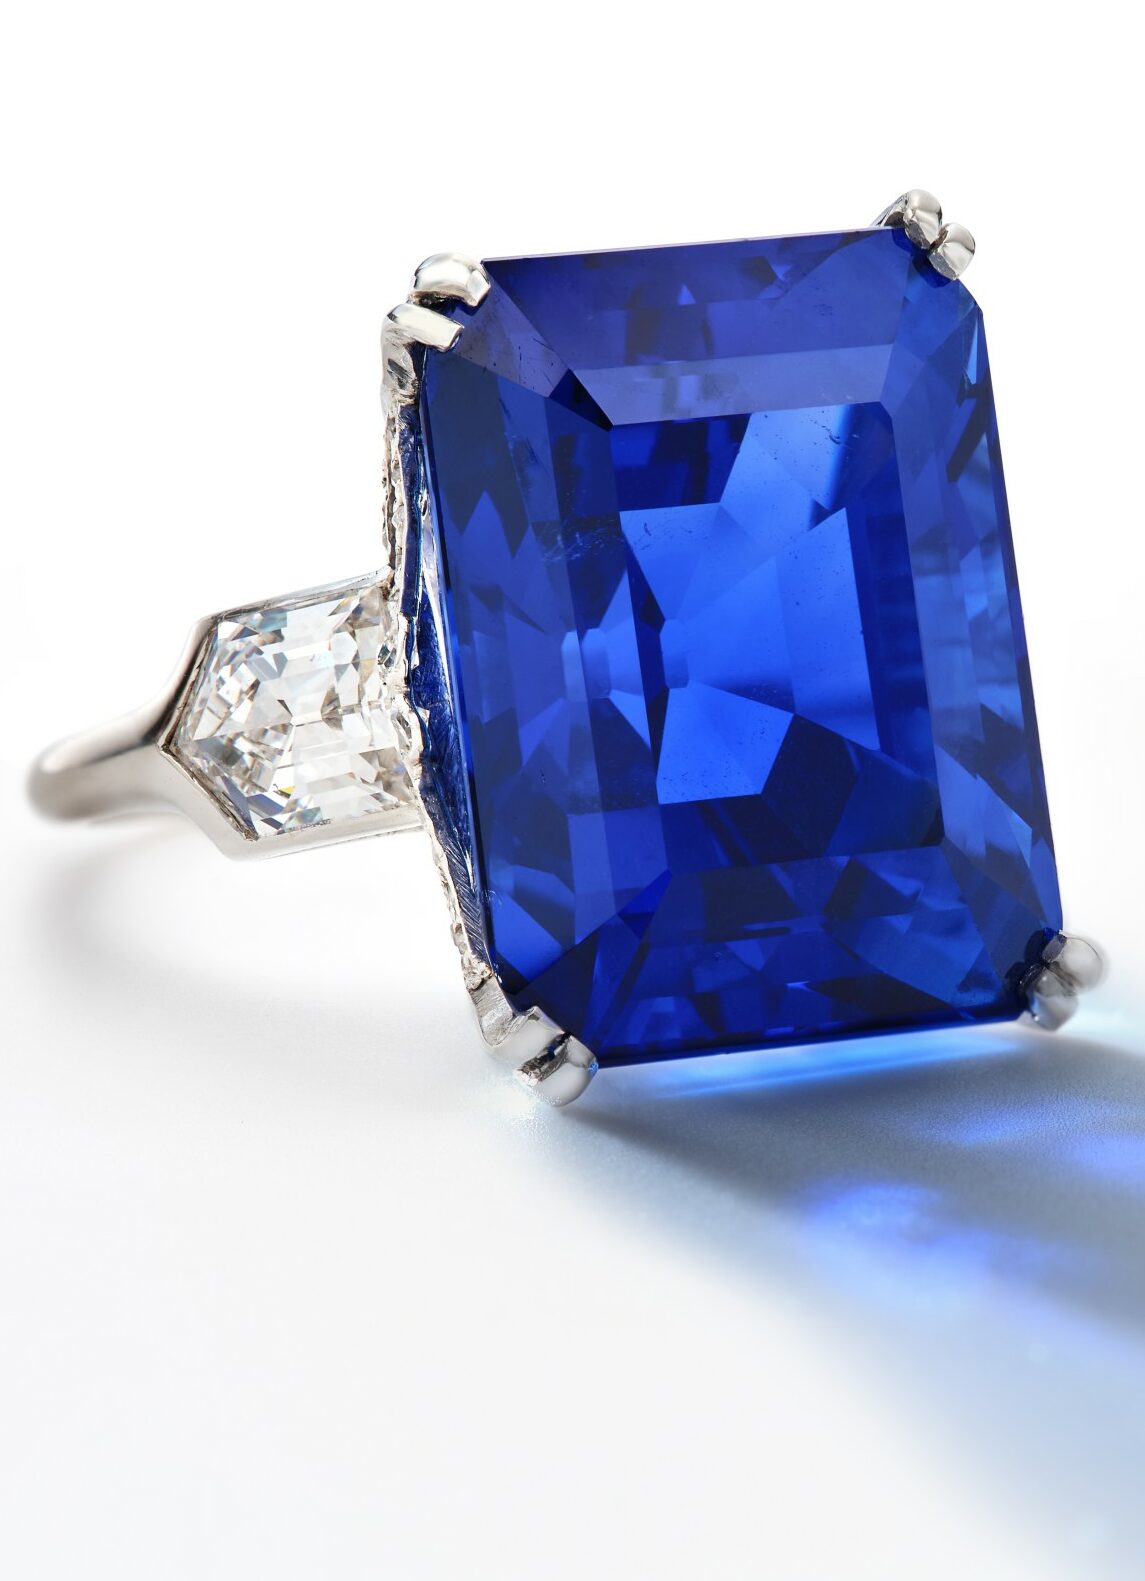 LOT NO - 18 ,Boucheron An Exceptional Sapphire and Diamond Ring, France